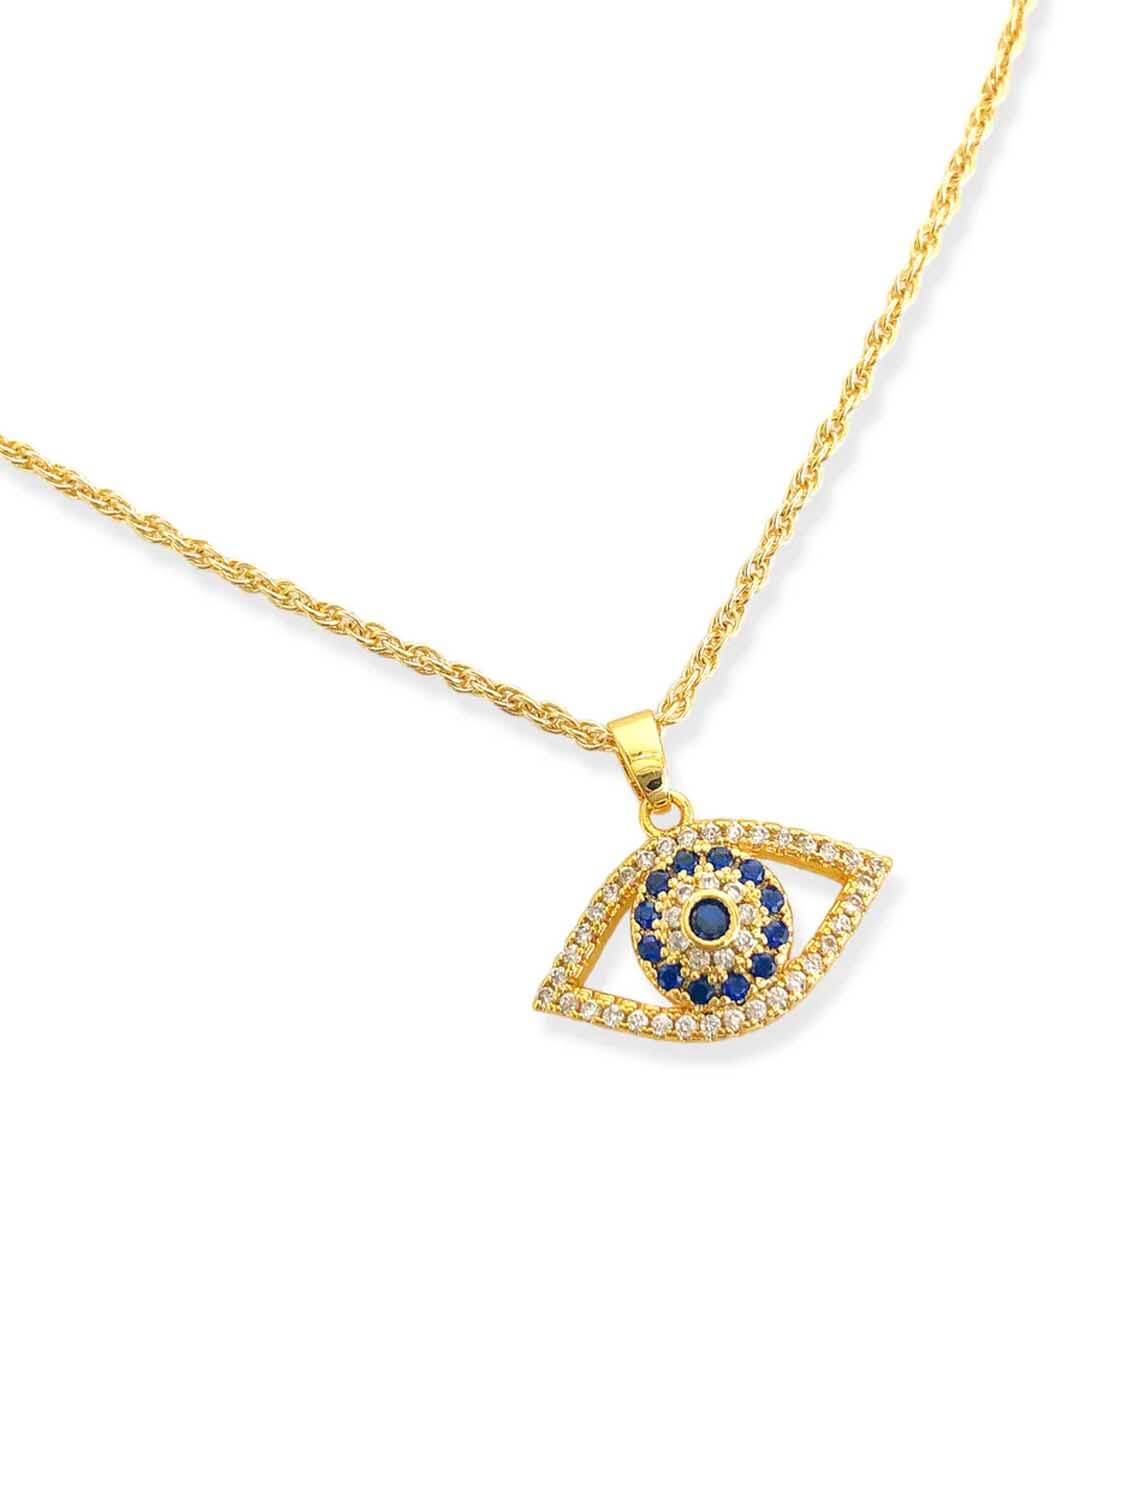 JAYNE Oval Chain with Eye Cutout necklace in Gold